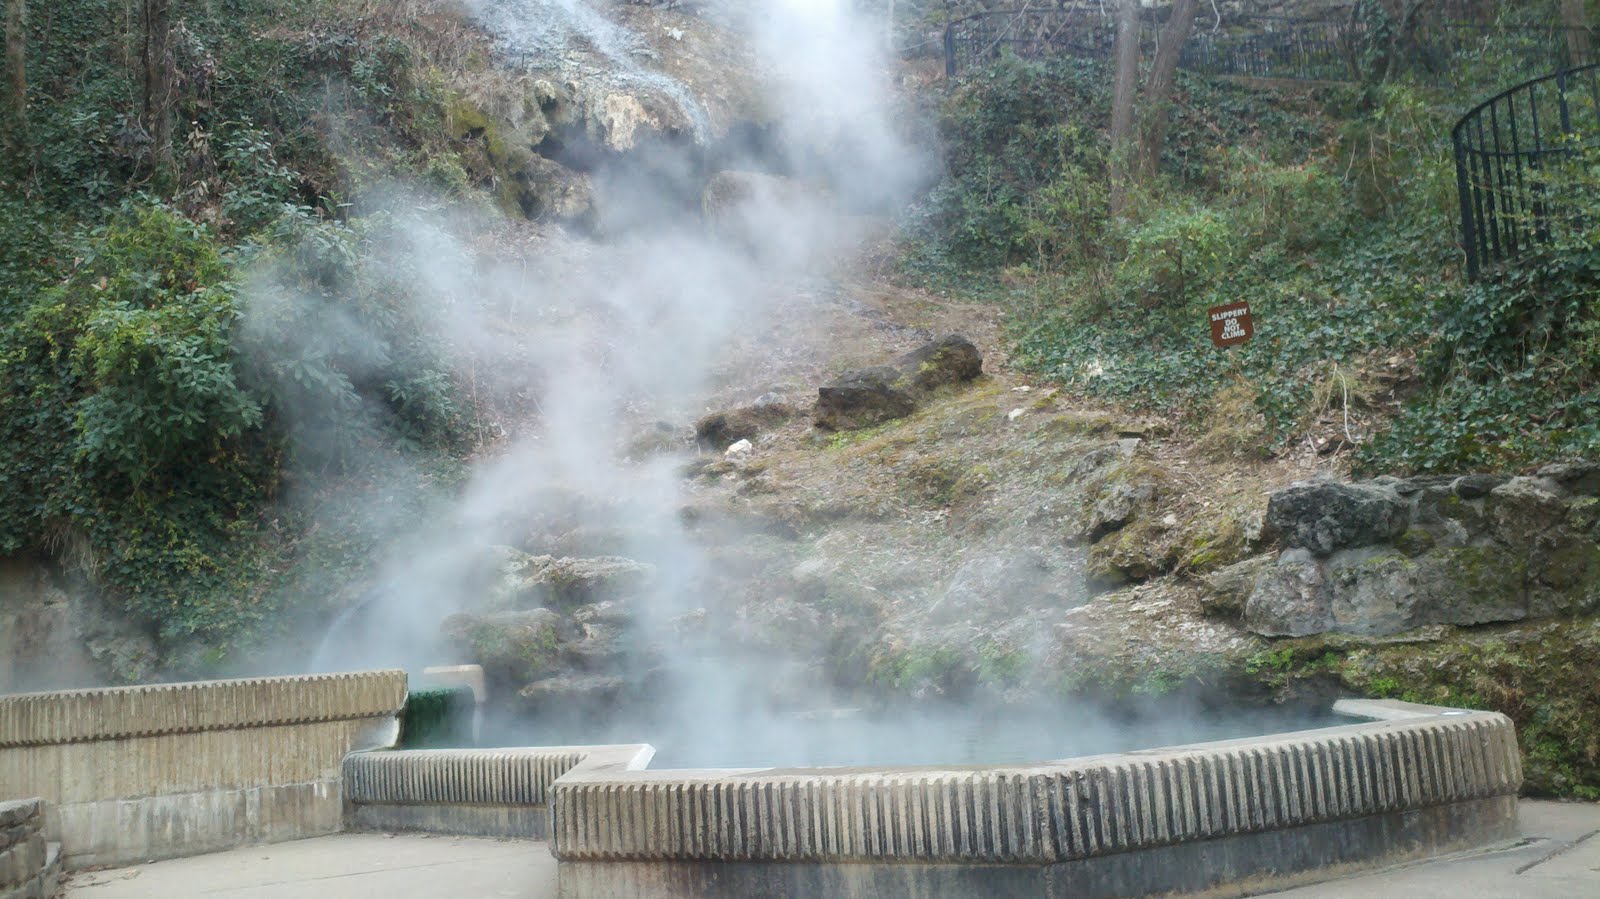 I spent a couple of days in Hot Springs (see photo), Arkansas